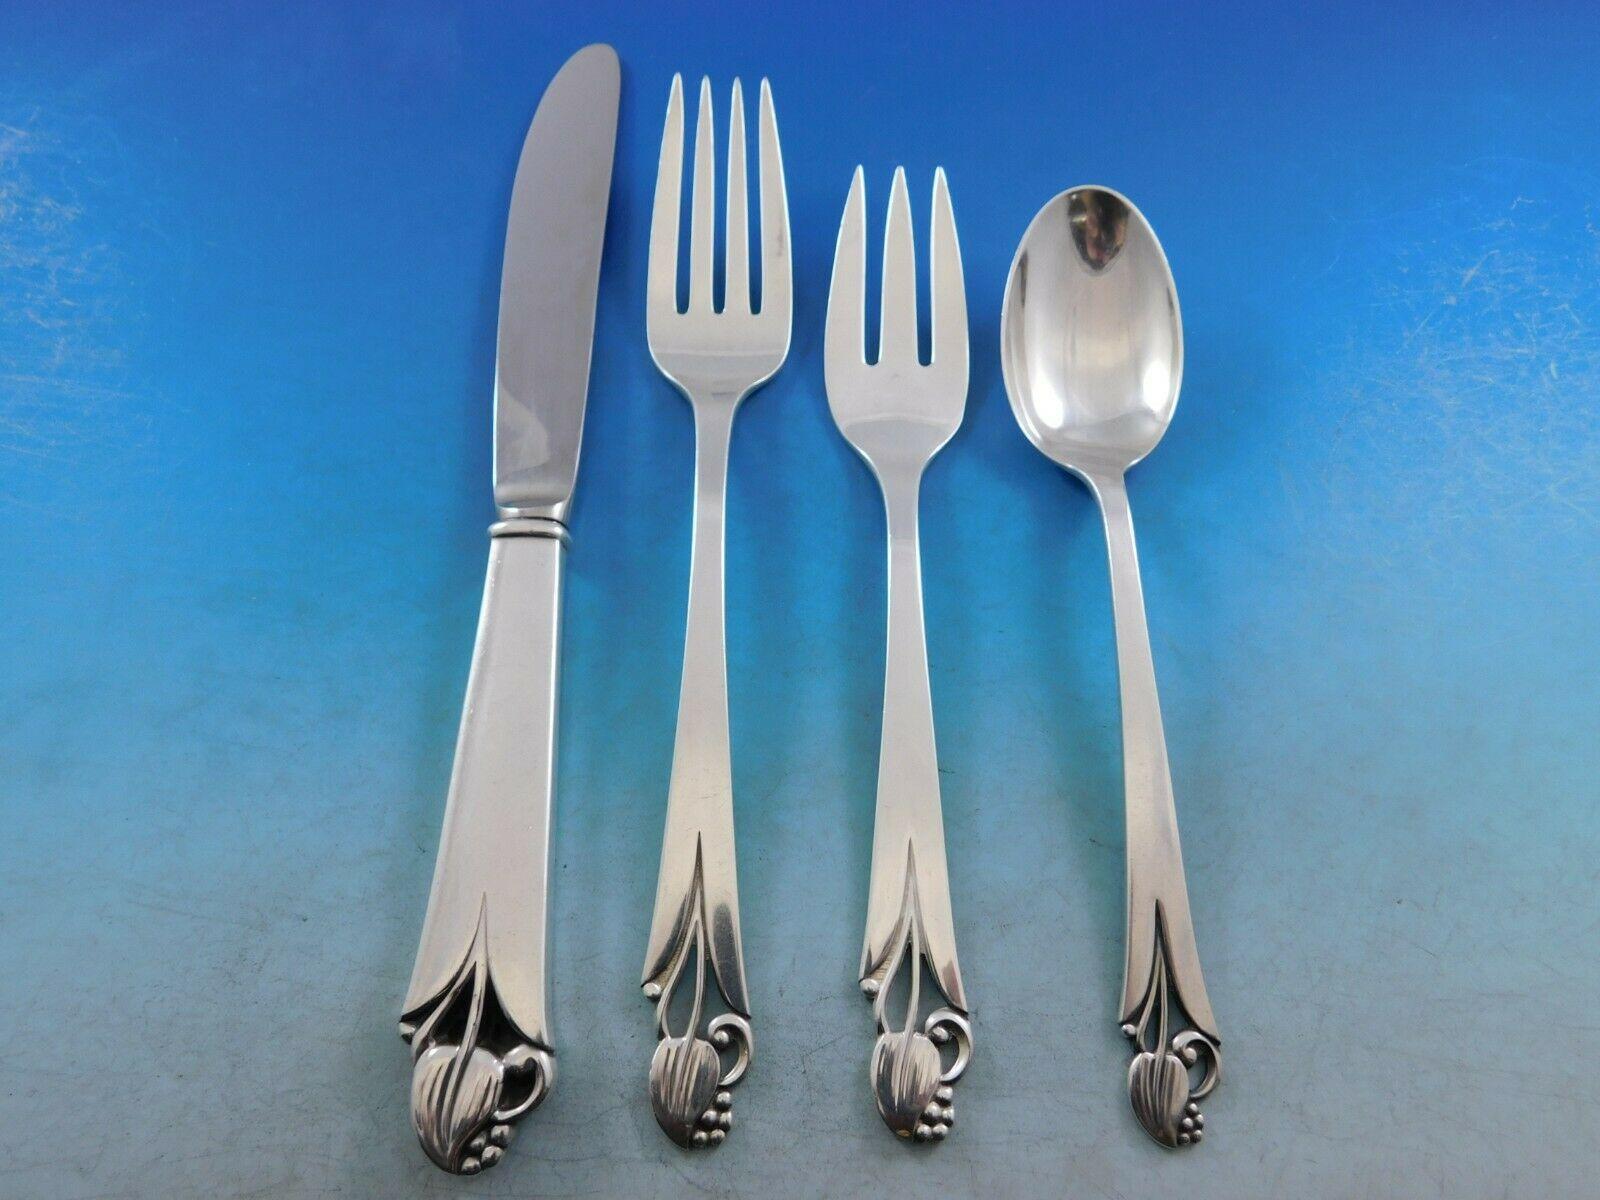 Woodlily (Glossy finish) by Frank Smith sterling silver flatware set, 53 pieces. This graceful pattern features a stylized leaf and openwork at the top of the handle around the stem, and bead detailing. This set includes:


8 knives, 8 7/8